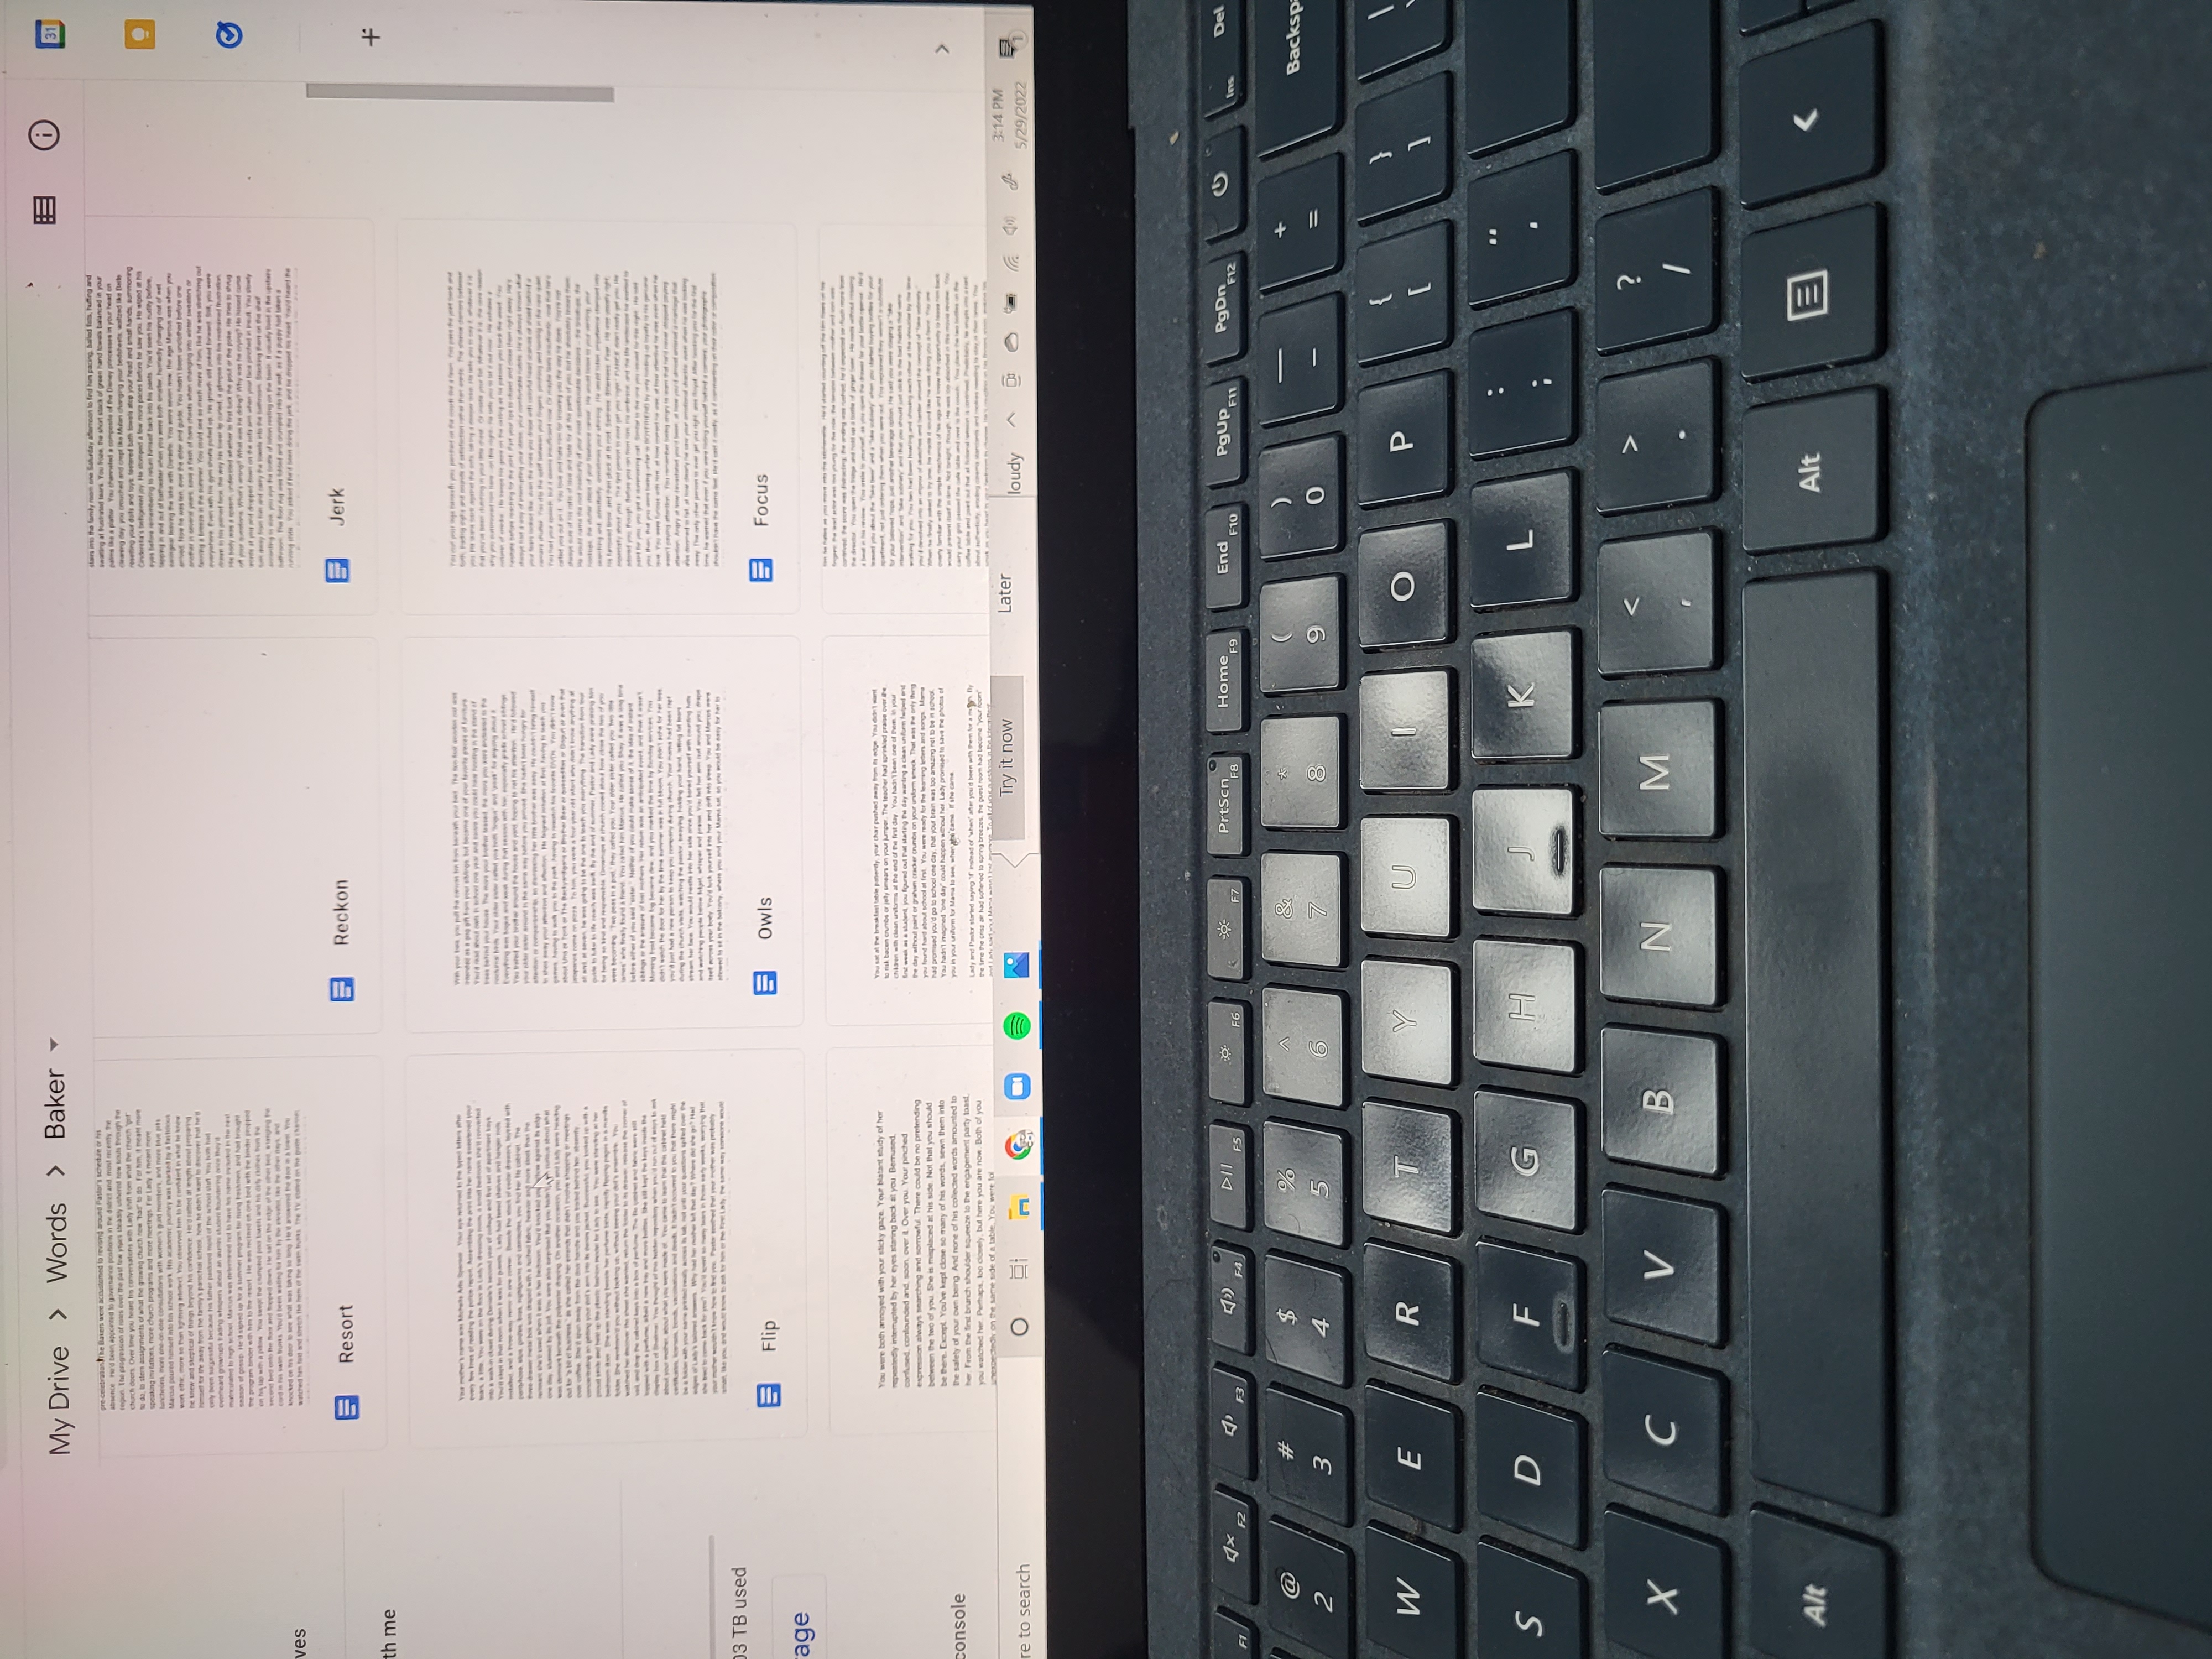 Pages on laptop screen, keyboard visible